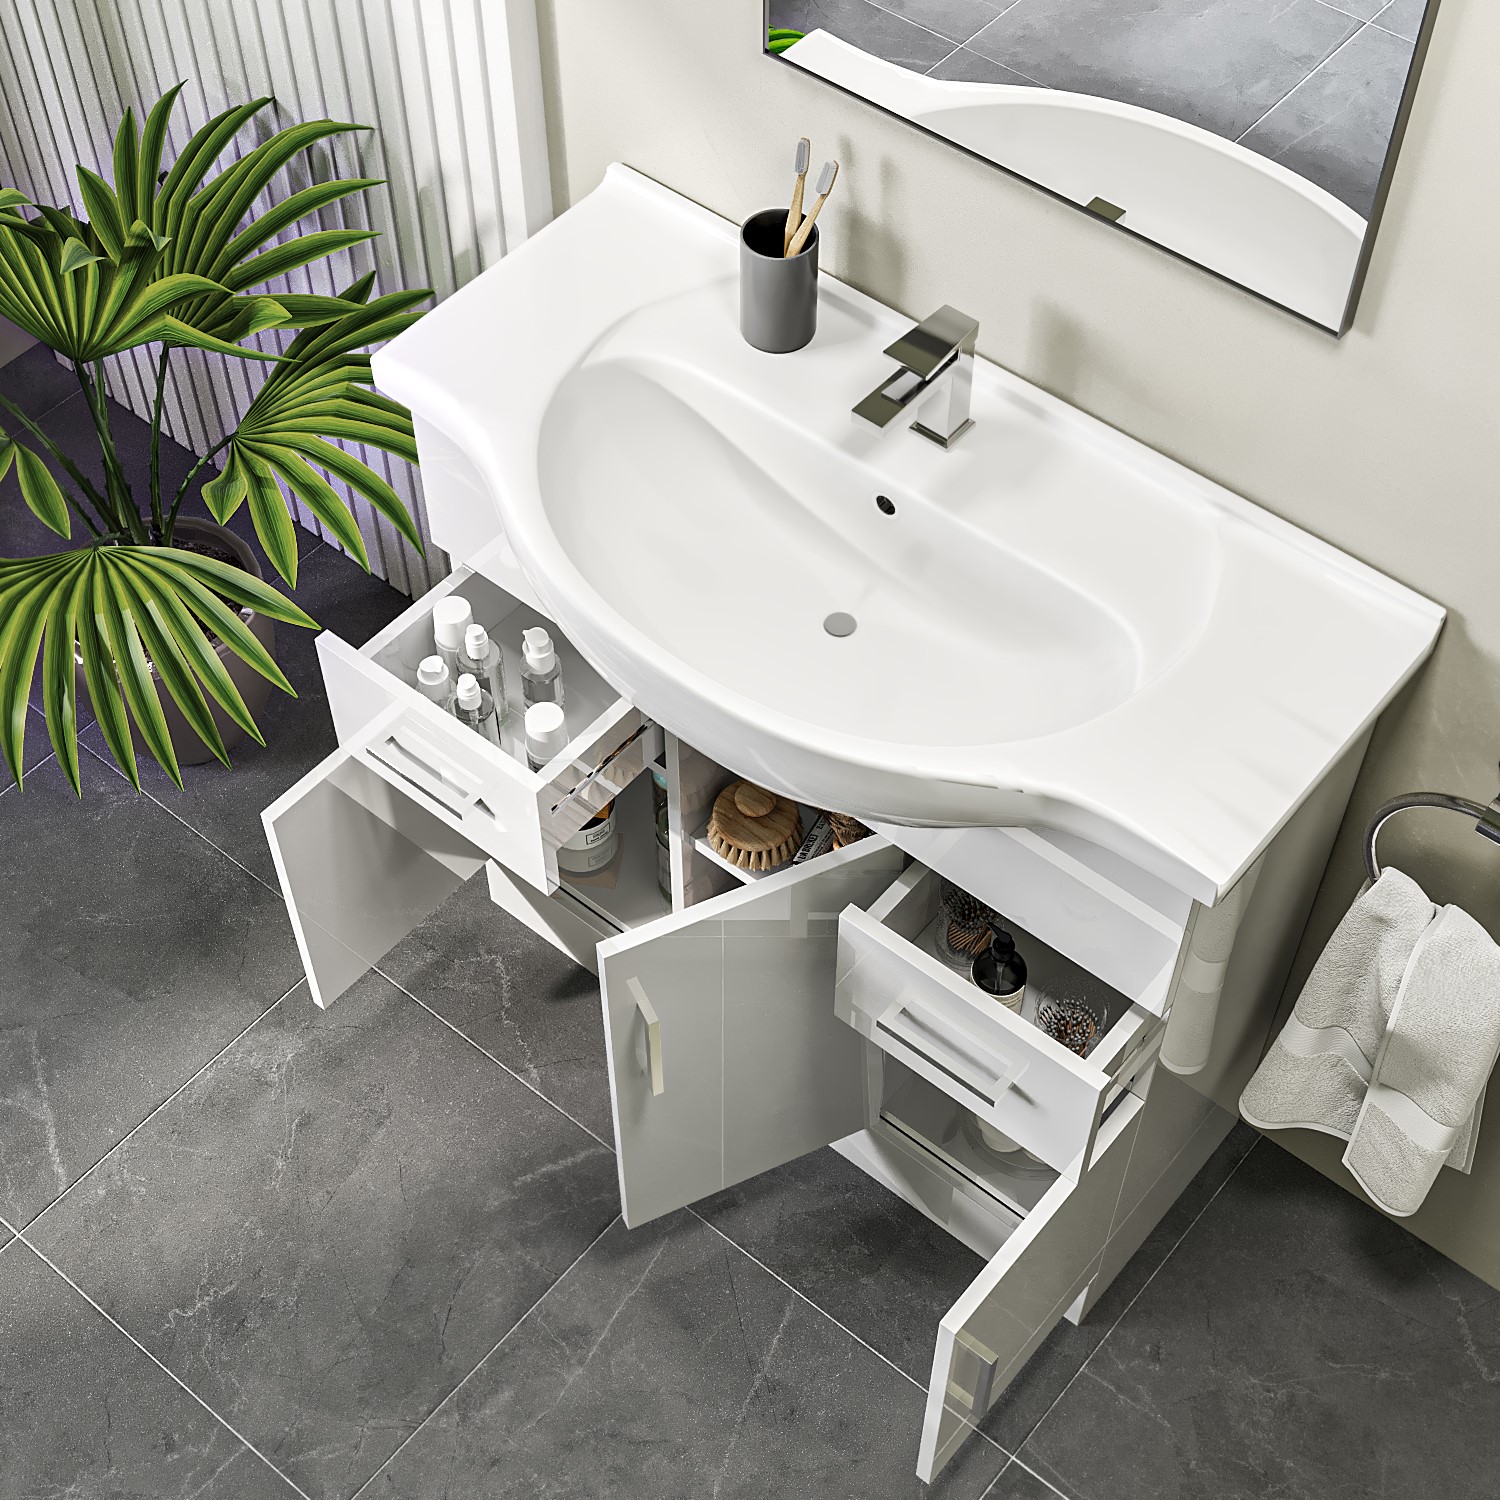 Better Bathrooms For Bathroom Overflow Ring Basin Sink Best Price Durable Easy Accessibility 